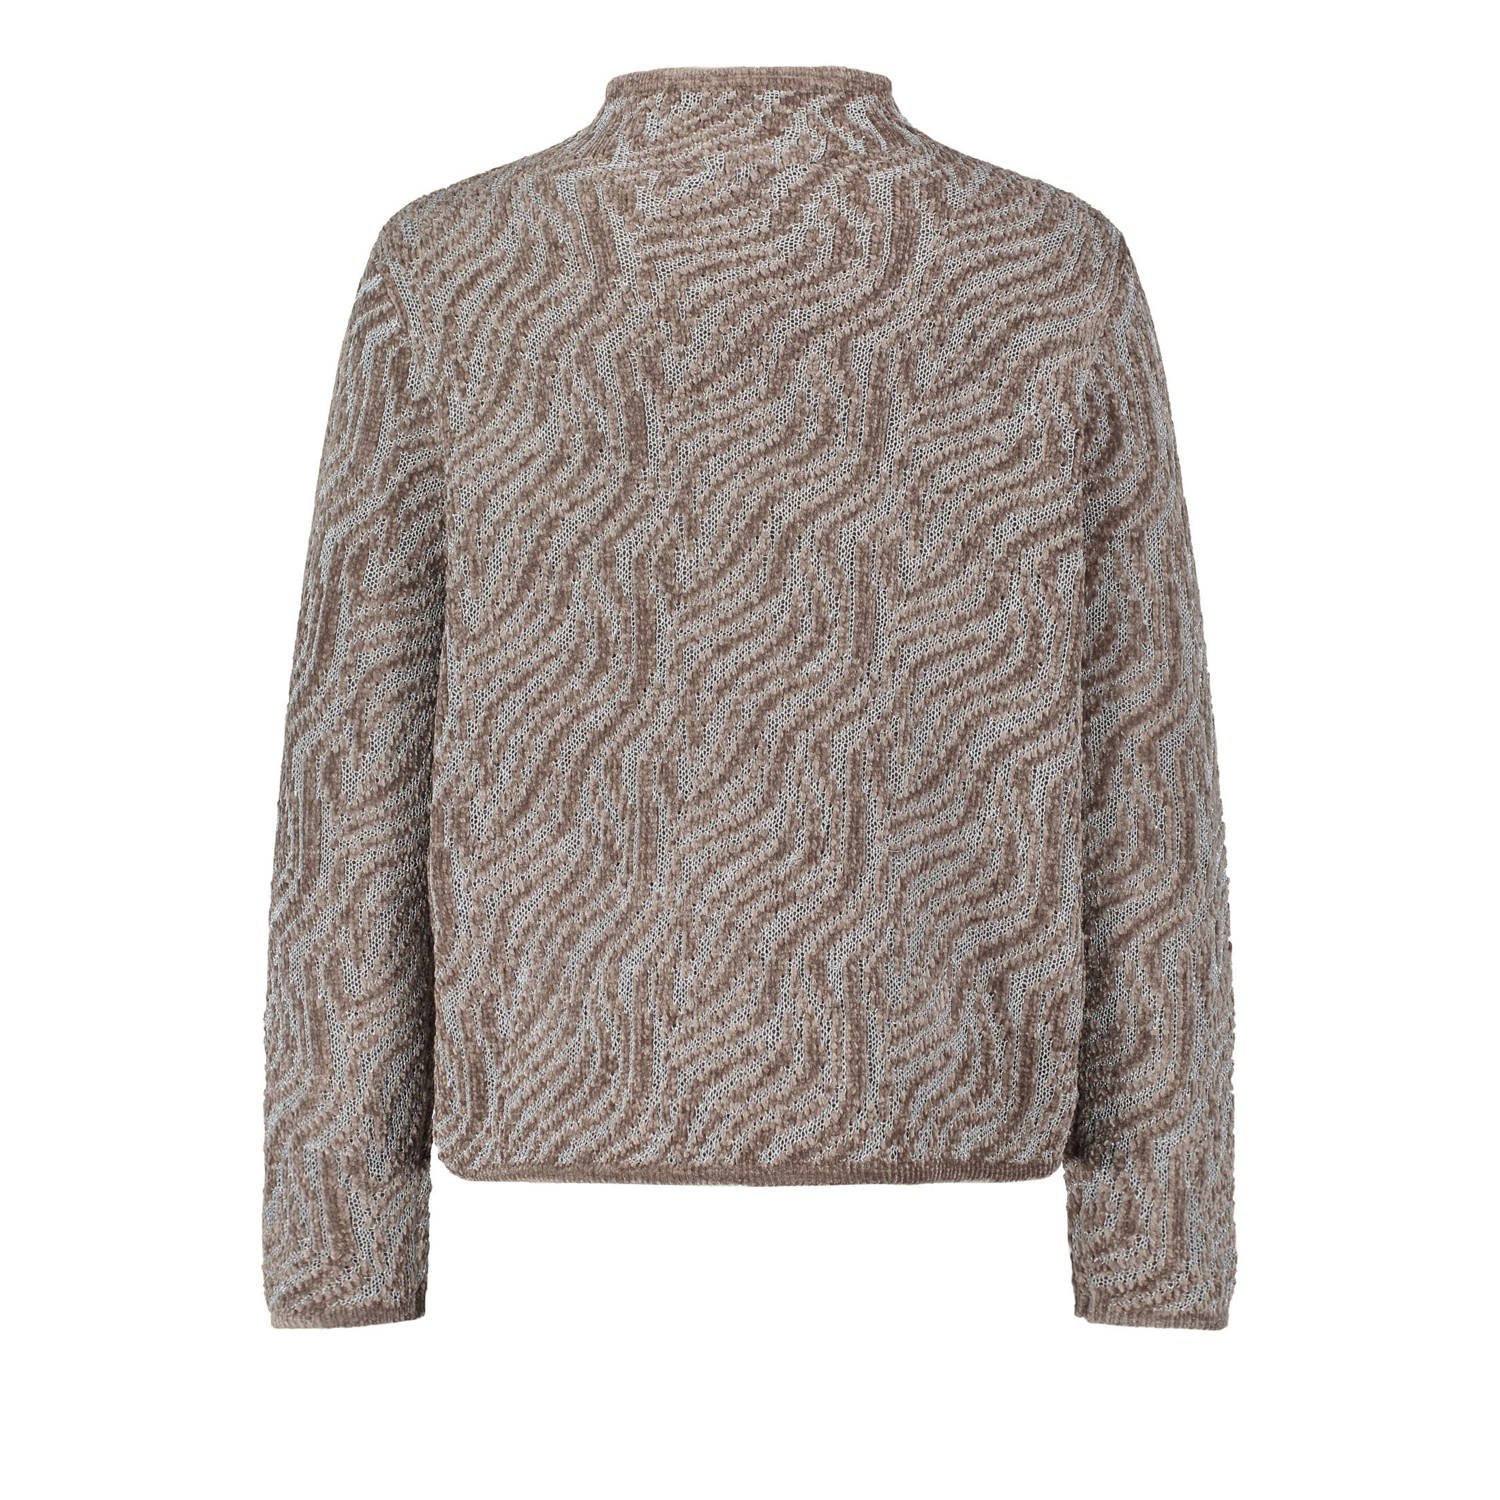 Betty Barclay trui met all over print en textuur taupe